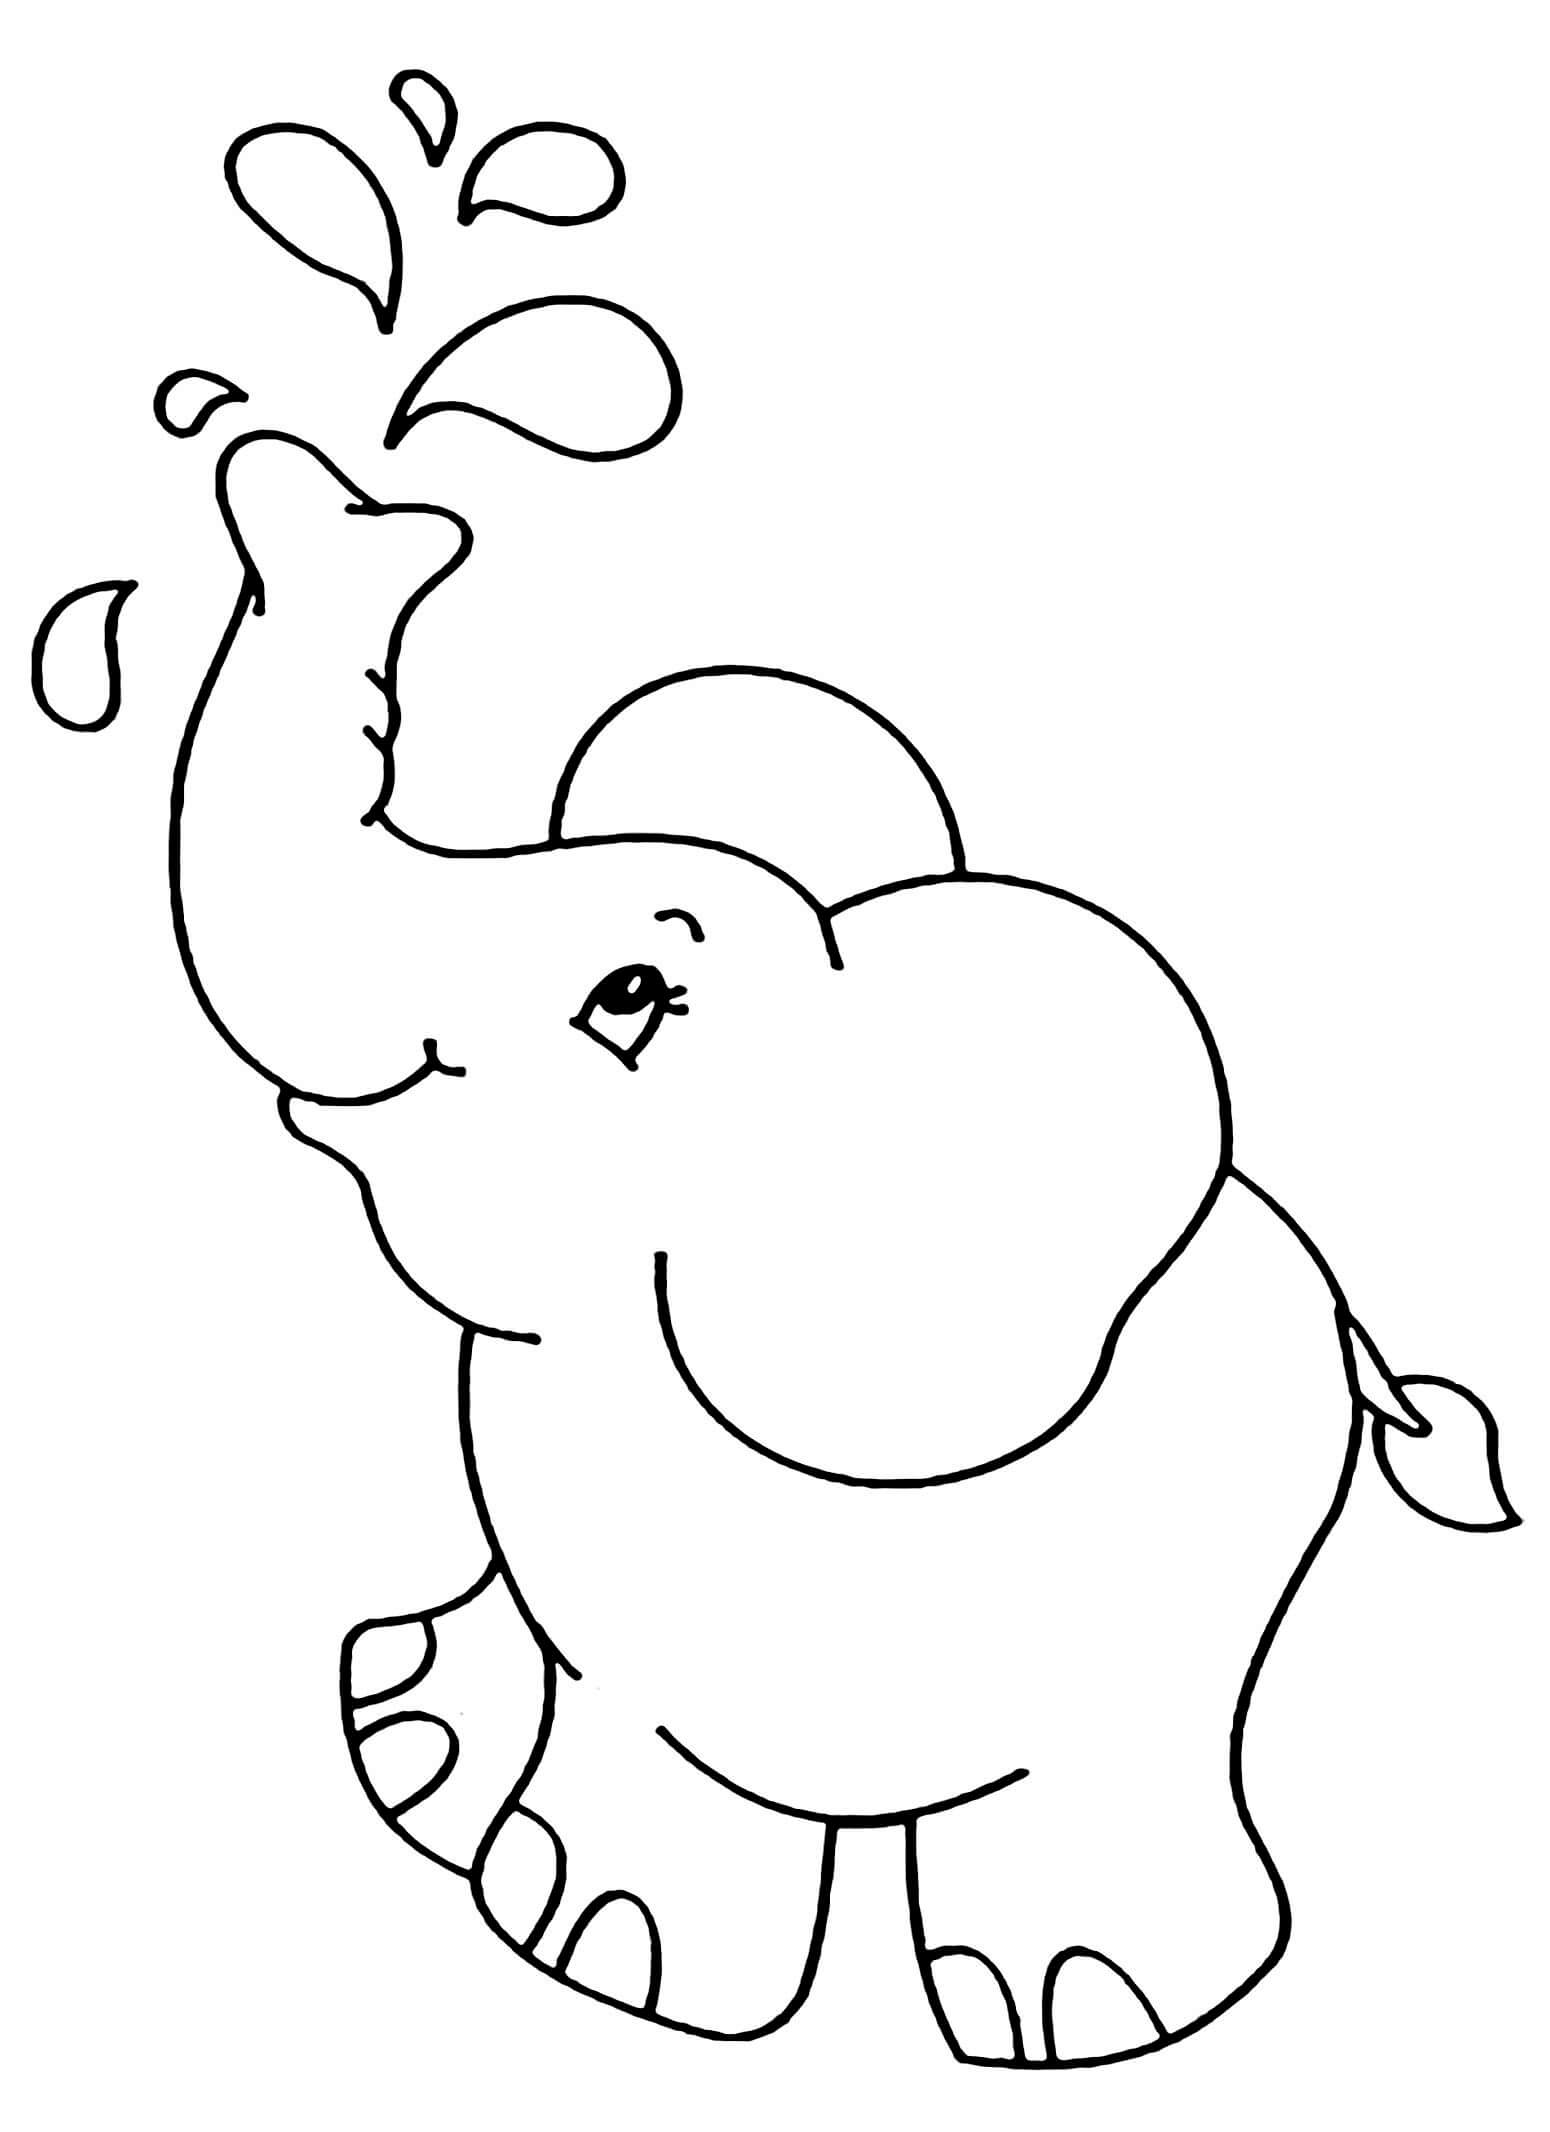 Free Printable Elephant Pictures